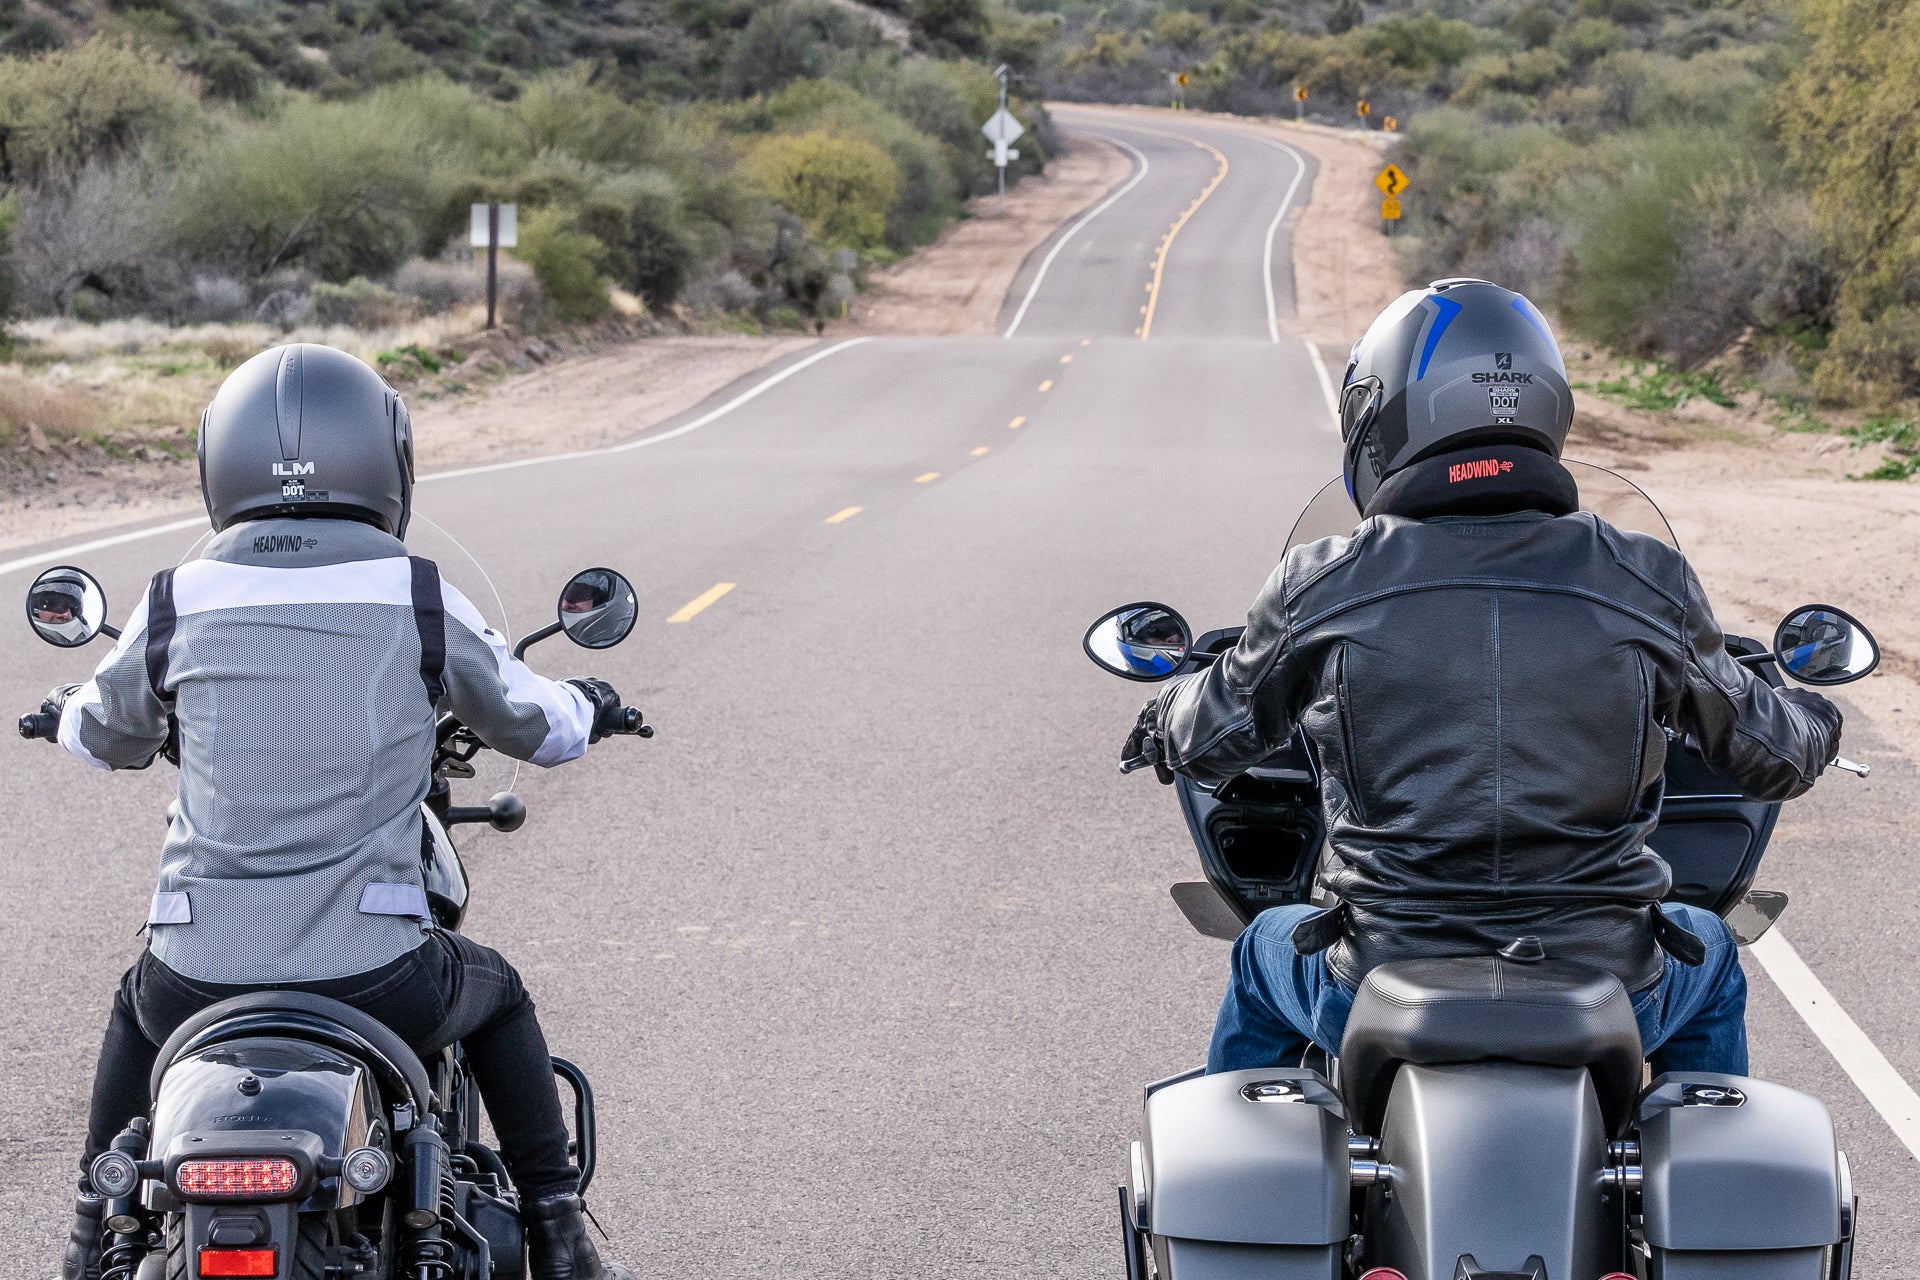 Two people riding down curvy road on motorcycles with neck ring on below helmet